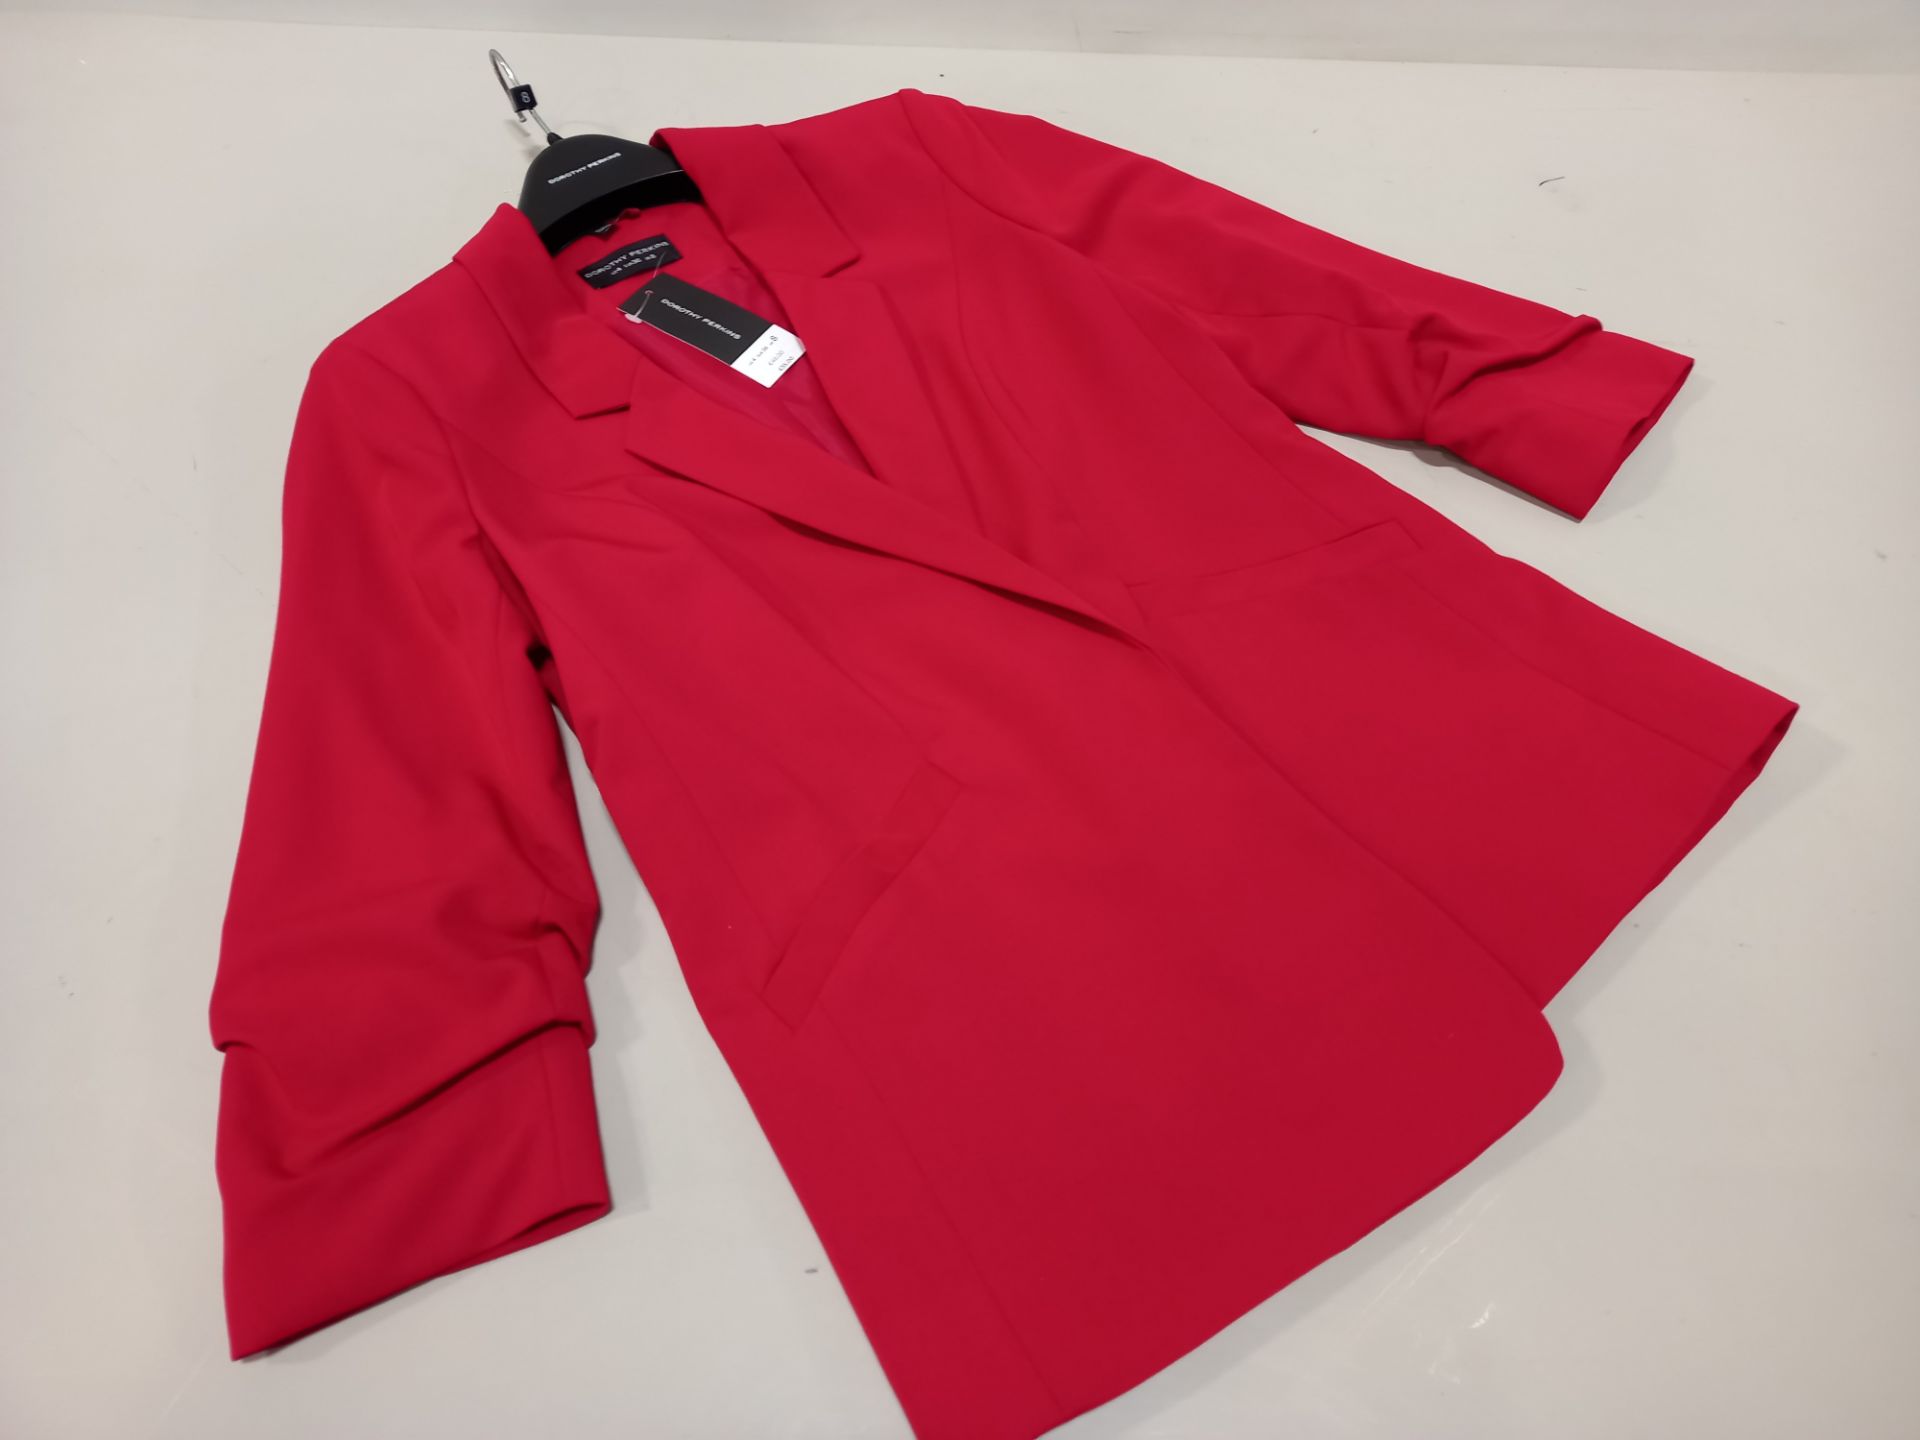 20 X DOROTHY PERKINS WOMEN'S RED JACKETS 3/4 LENGTH SLEEVES - SIZES 18s & 16s WITH TAGS - PICK LOOSE